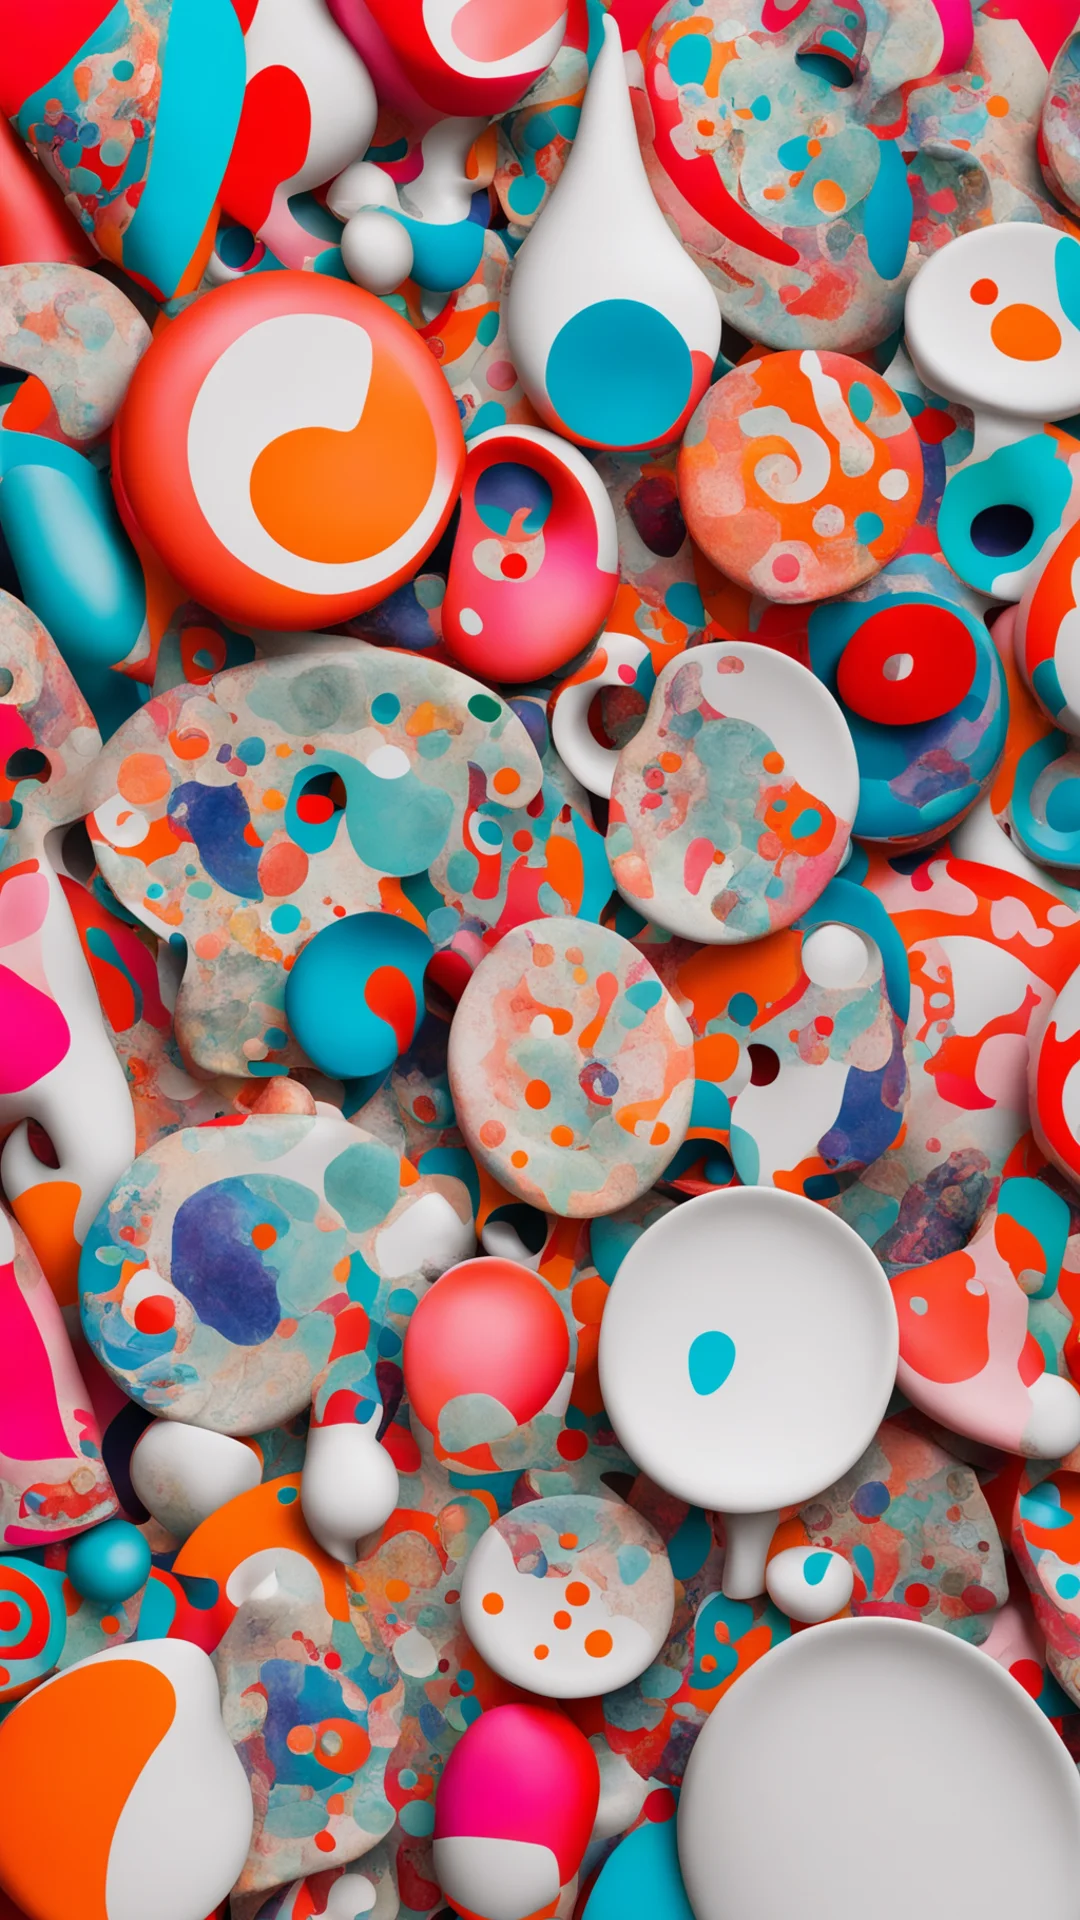 amazing an abstract image of ceramic objects in a maximalist style  awesome portrait 2 tall